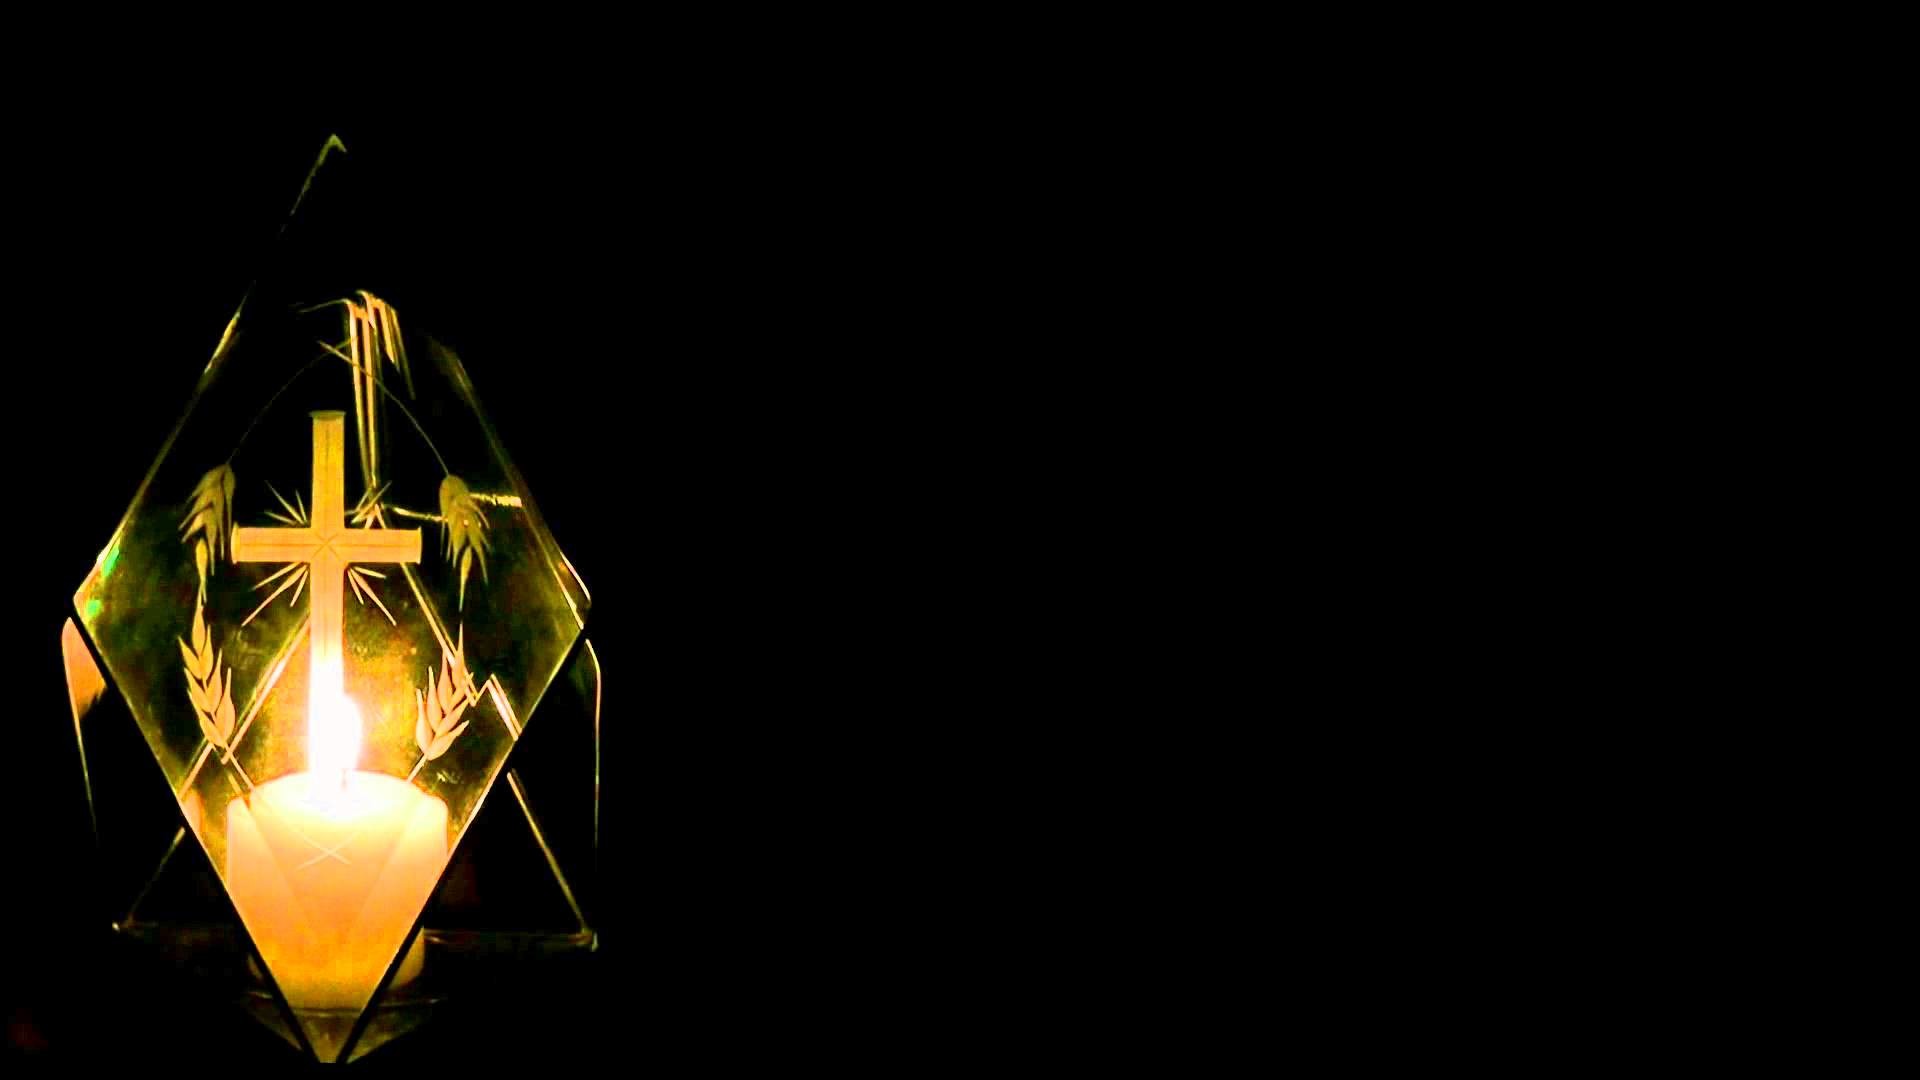 1920x1080 Glass Cross Candle - Free Creative Commons Christian Worship background  video 1080p stock video - YouTube